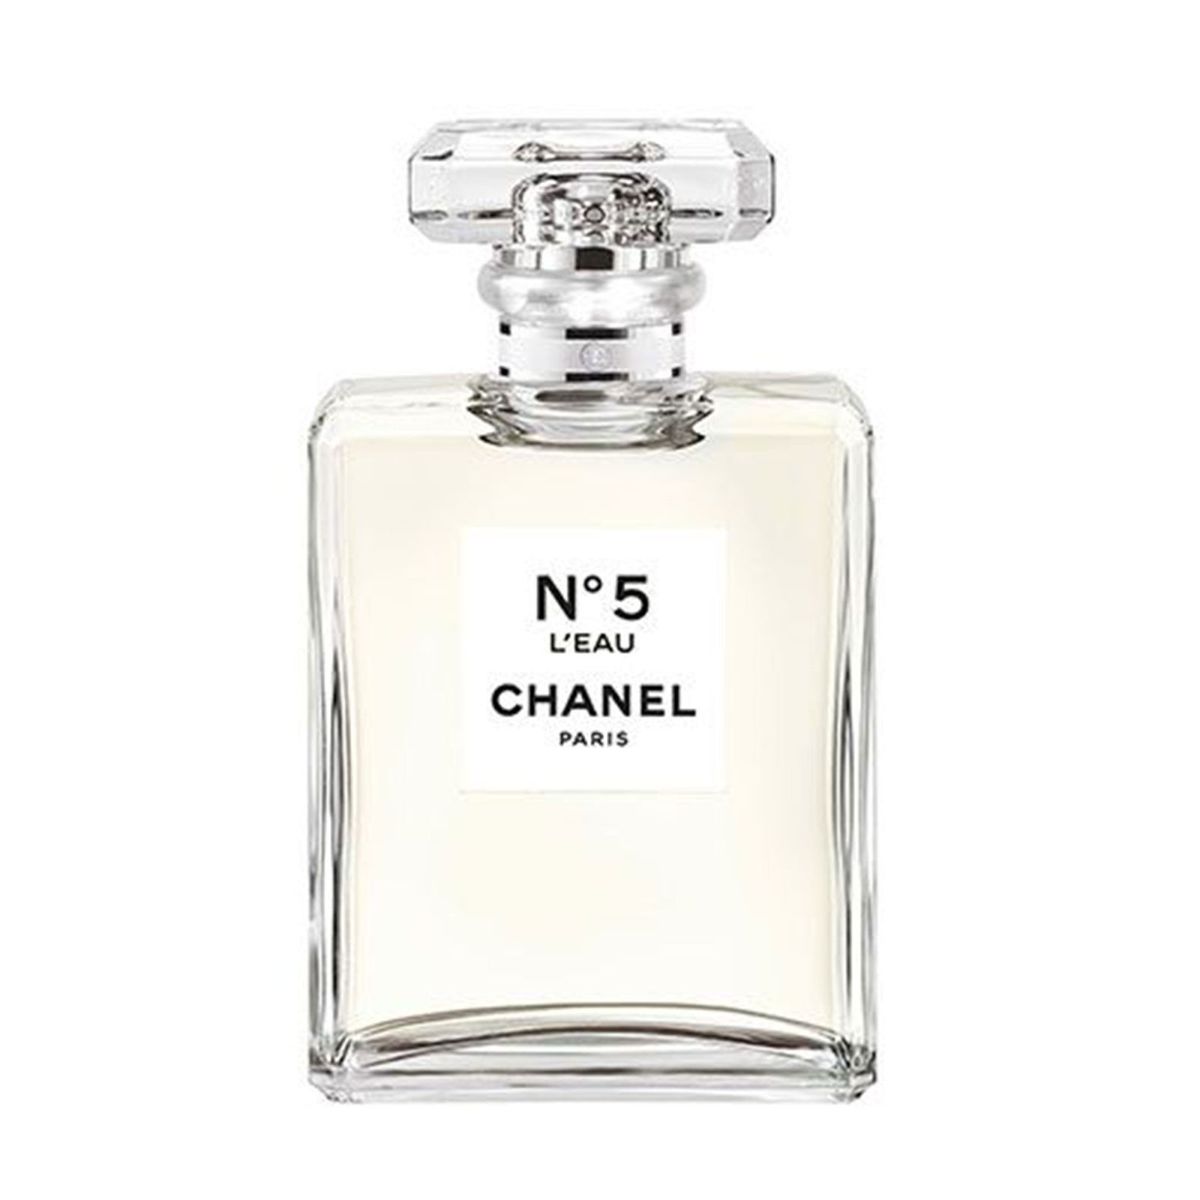 Chanel to Launch New No. 5 Scent - Chanel No. 5 Is Getting a